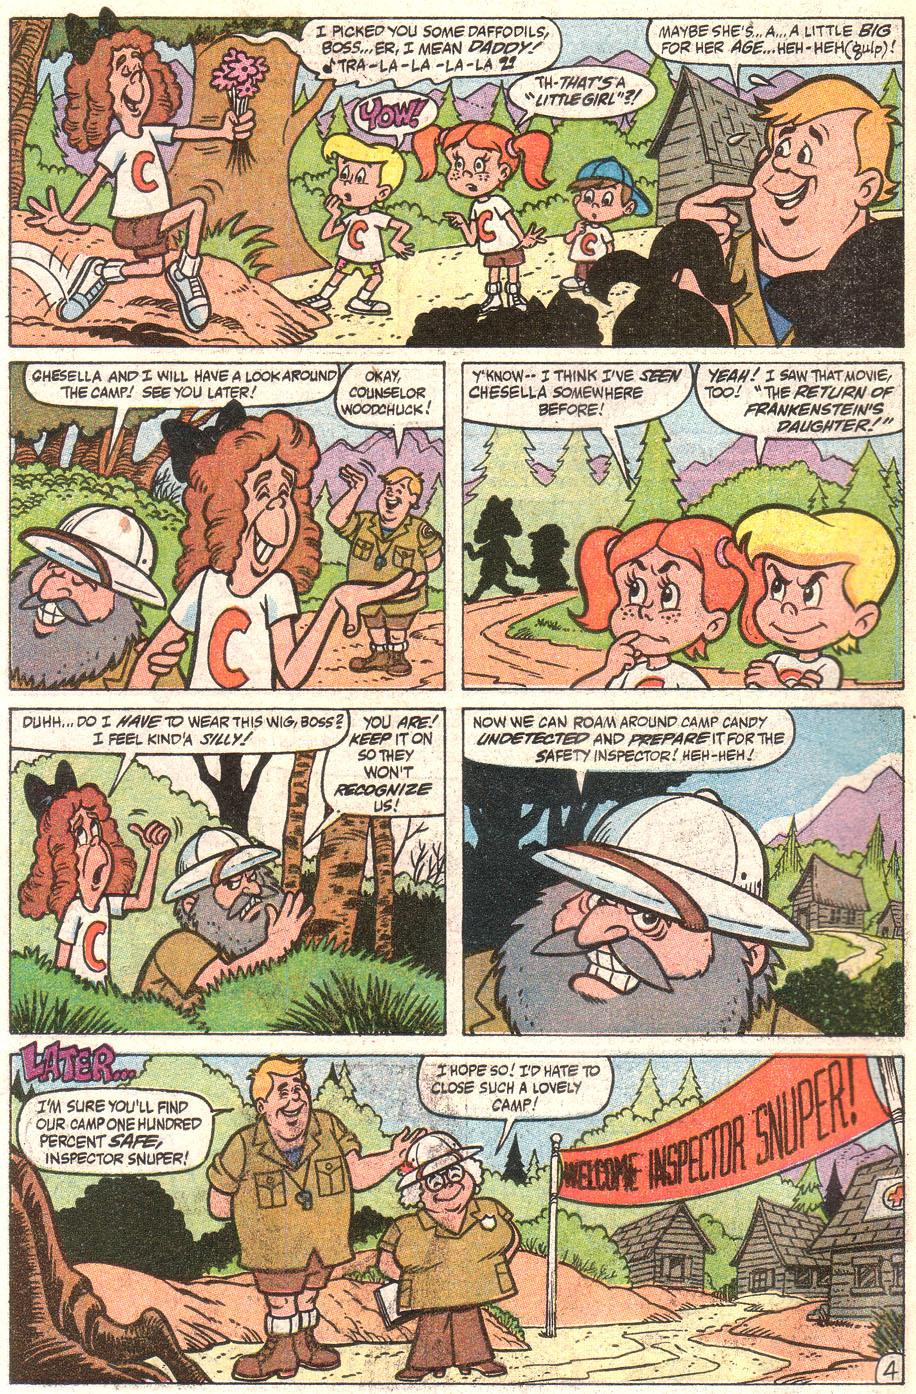 Read online Camp Candy comic -  Issue #2 - 6